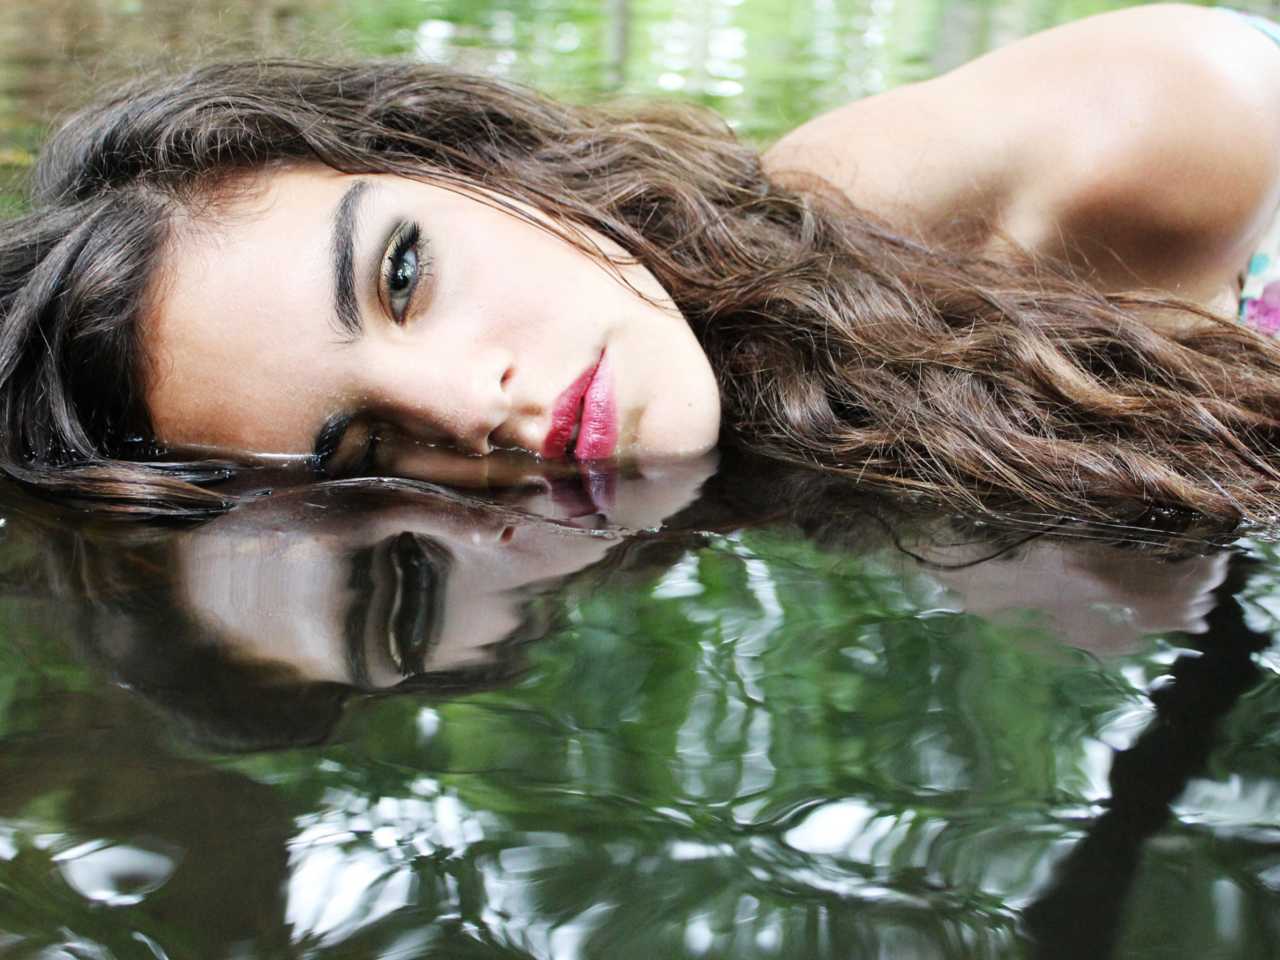 Beautiful Model And Reflection In Water wallpaper 1280x960